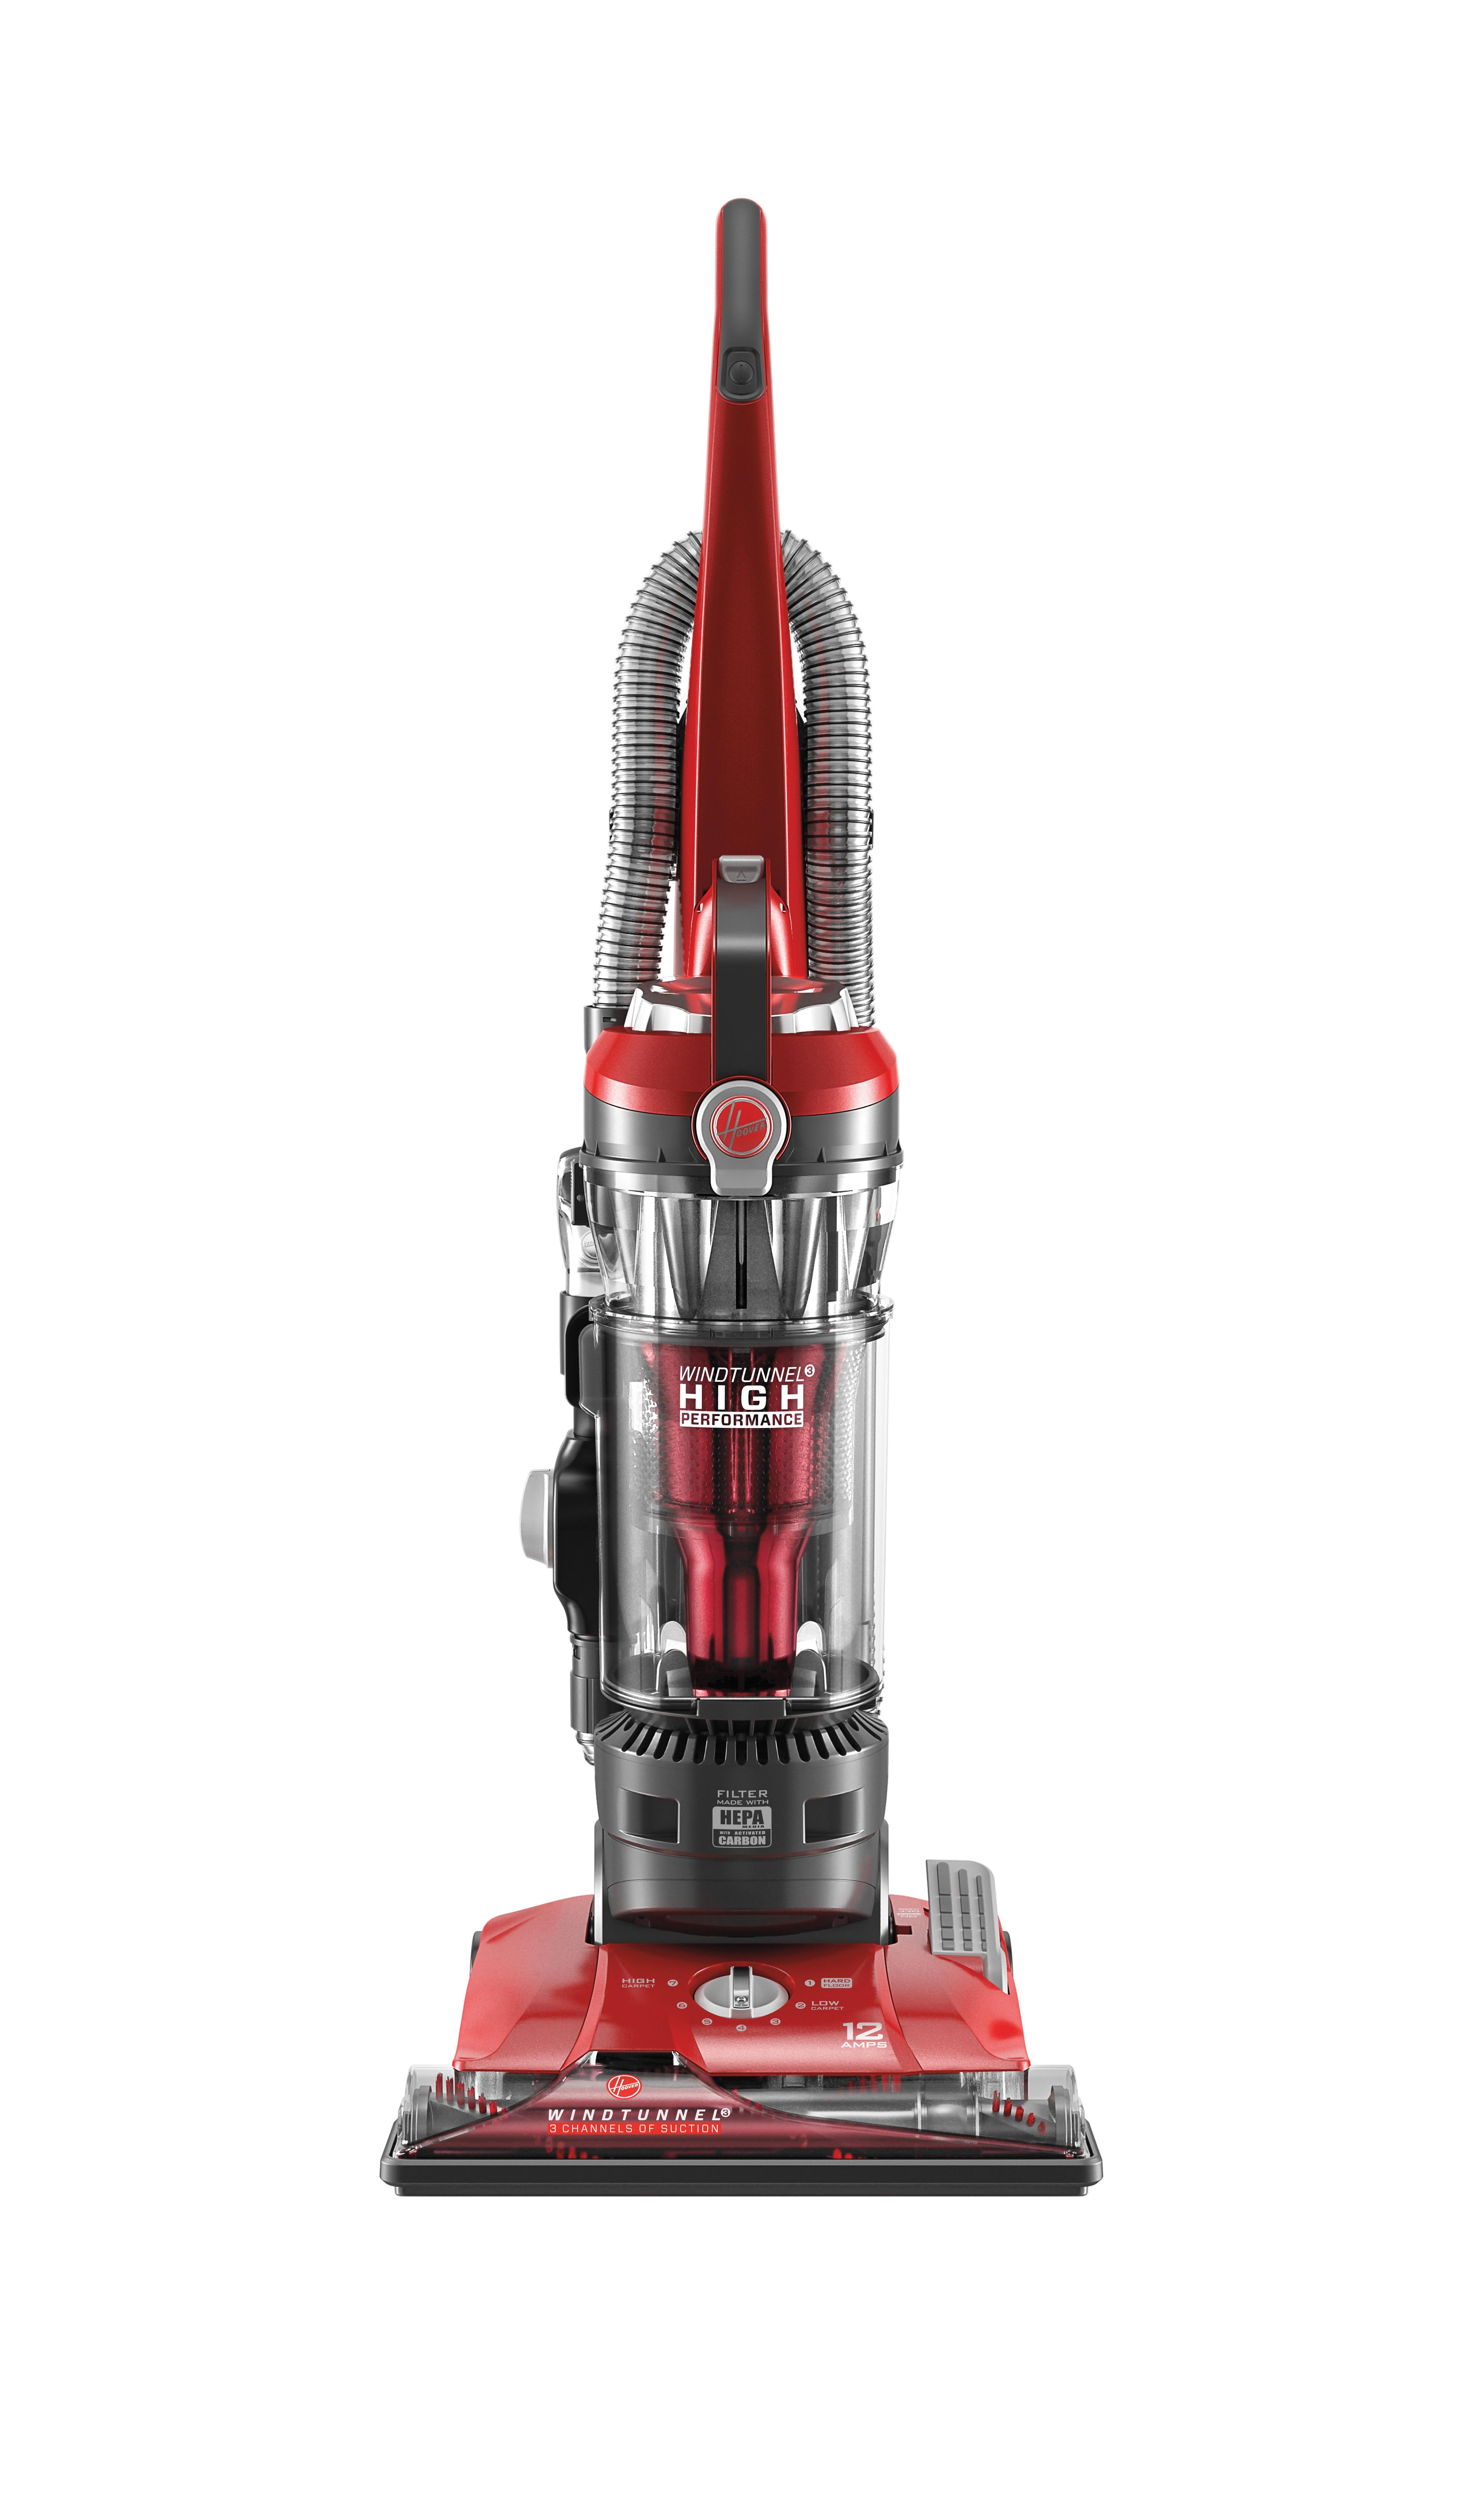 Hoover high performance bagless upright vacuum cleaner (refurbished) for $32, free shipping